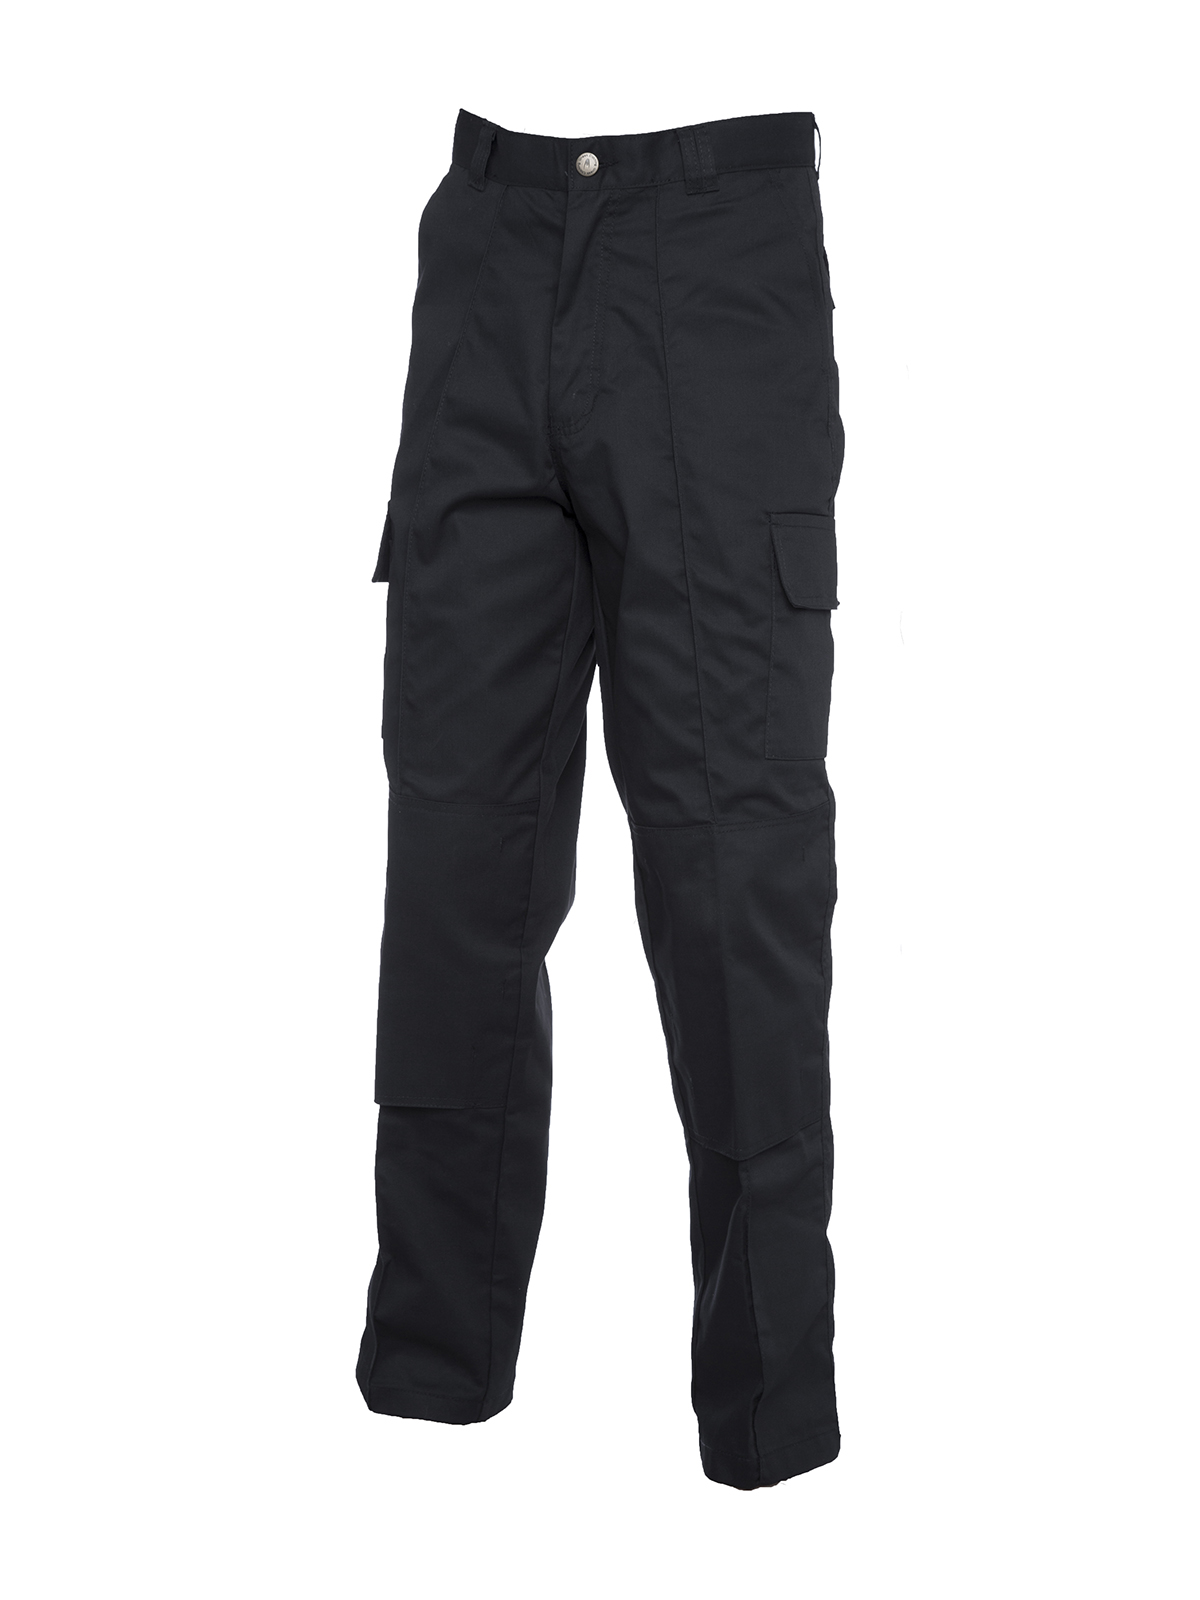 Uneek Cargo Trouser with Knee Pad Pockets 